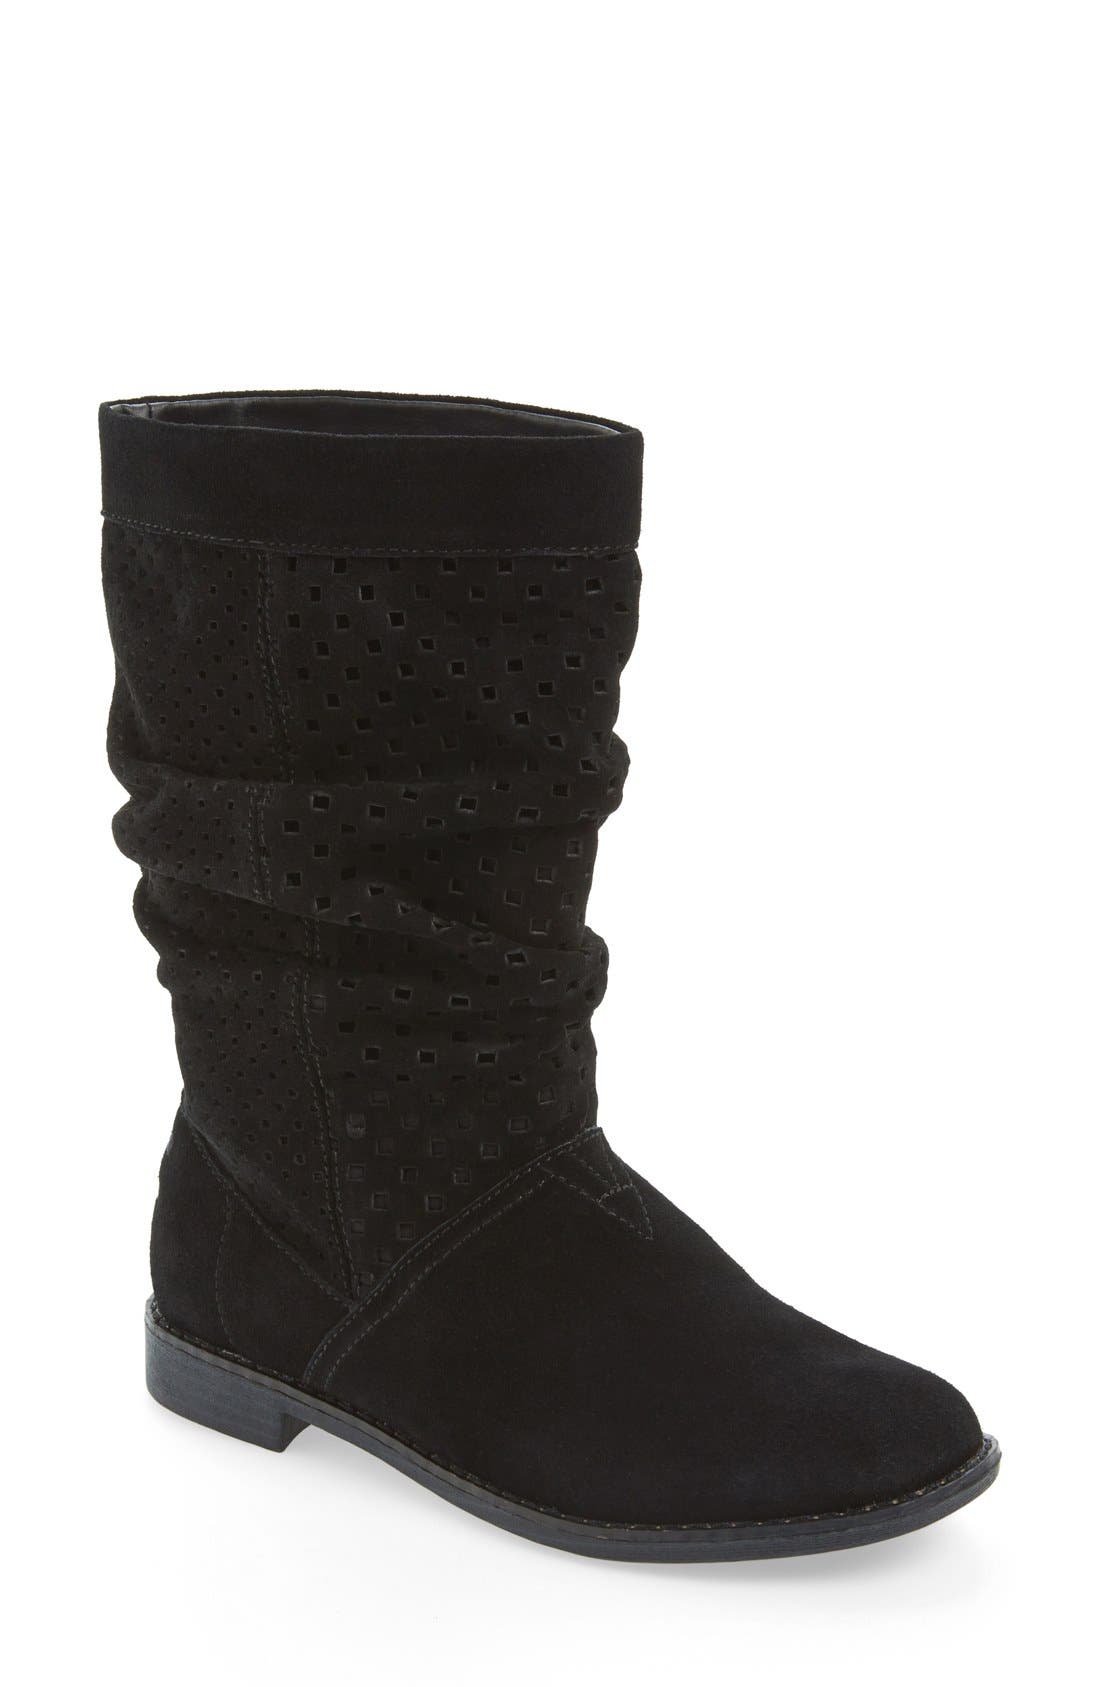 toms slouch boots